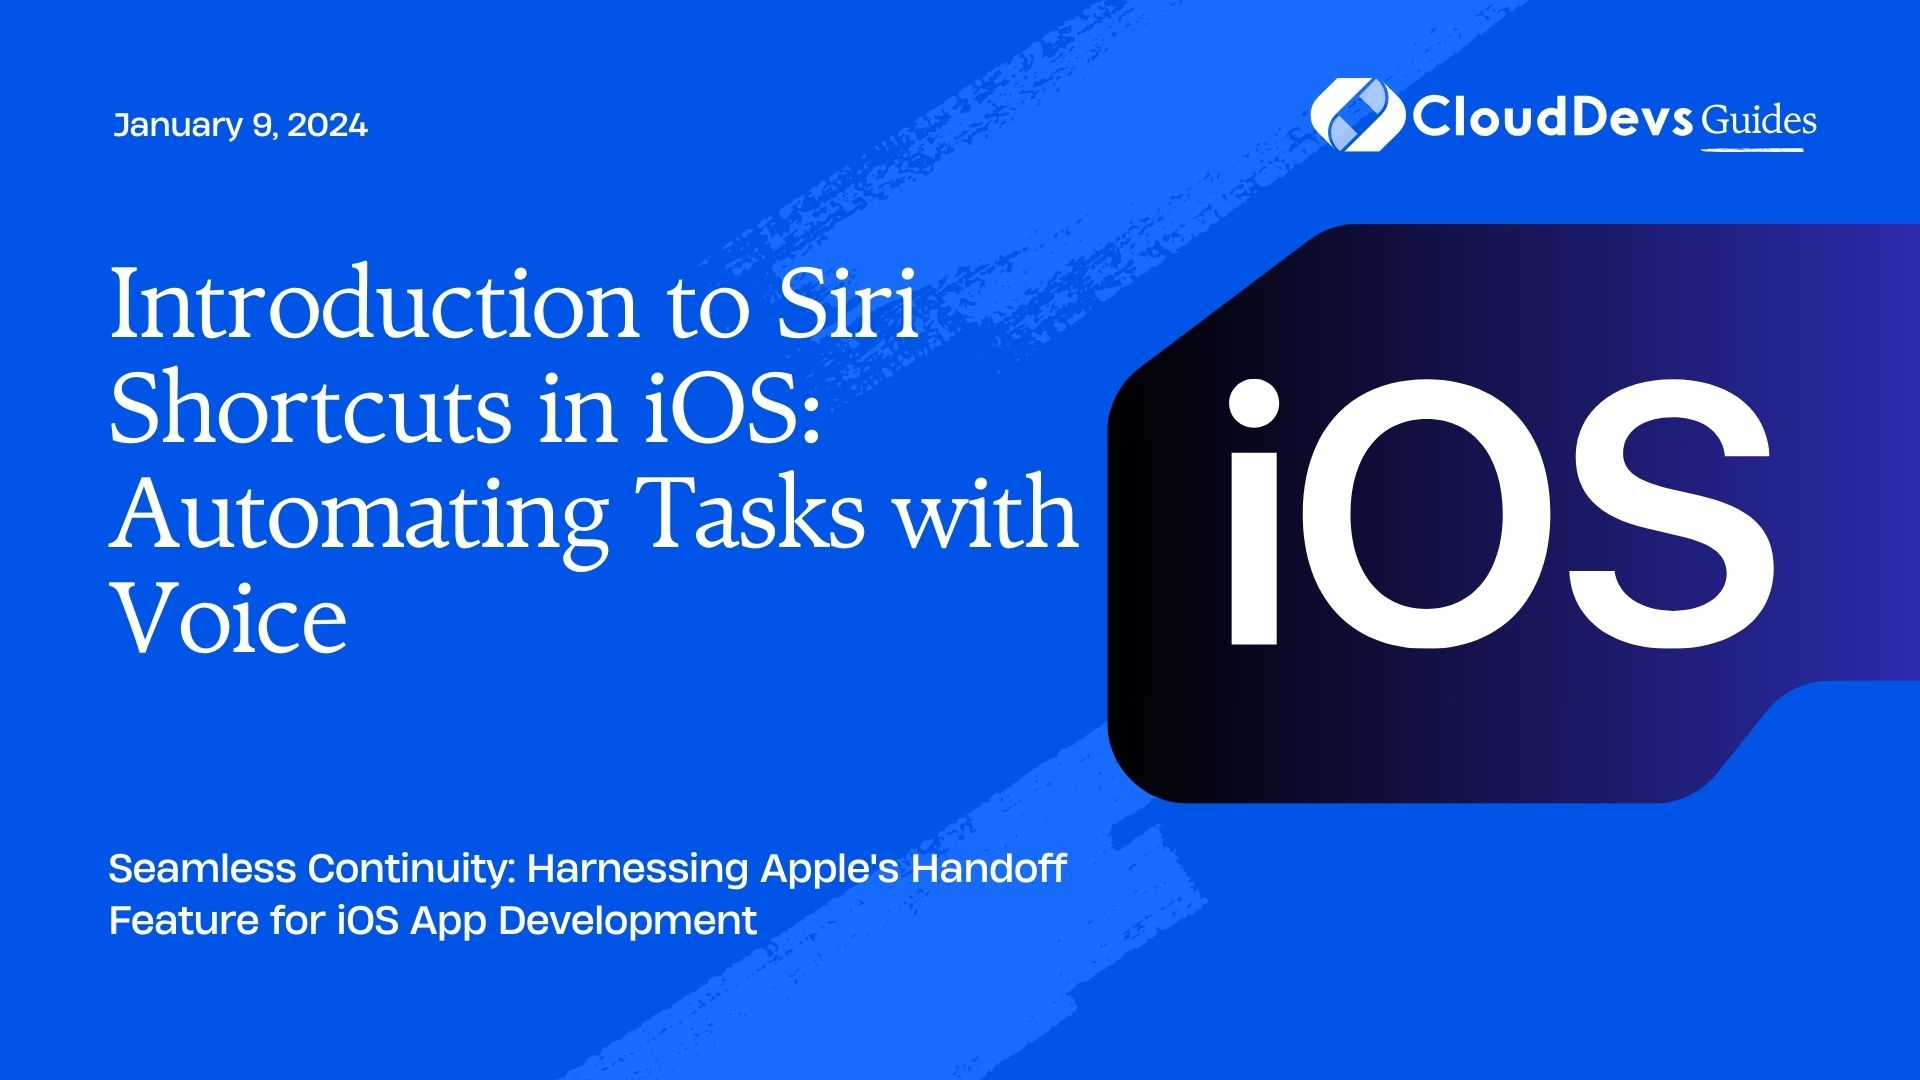 Introduction to Siri Shortcuts in iOS: Automating Tasks with Voice